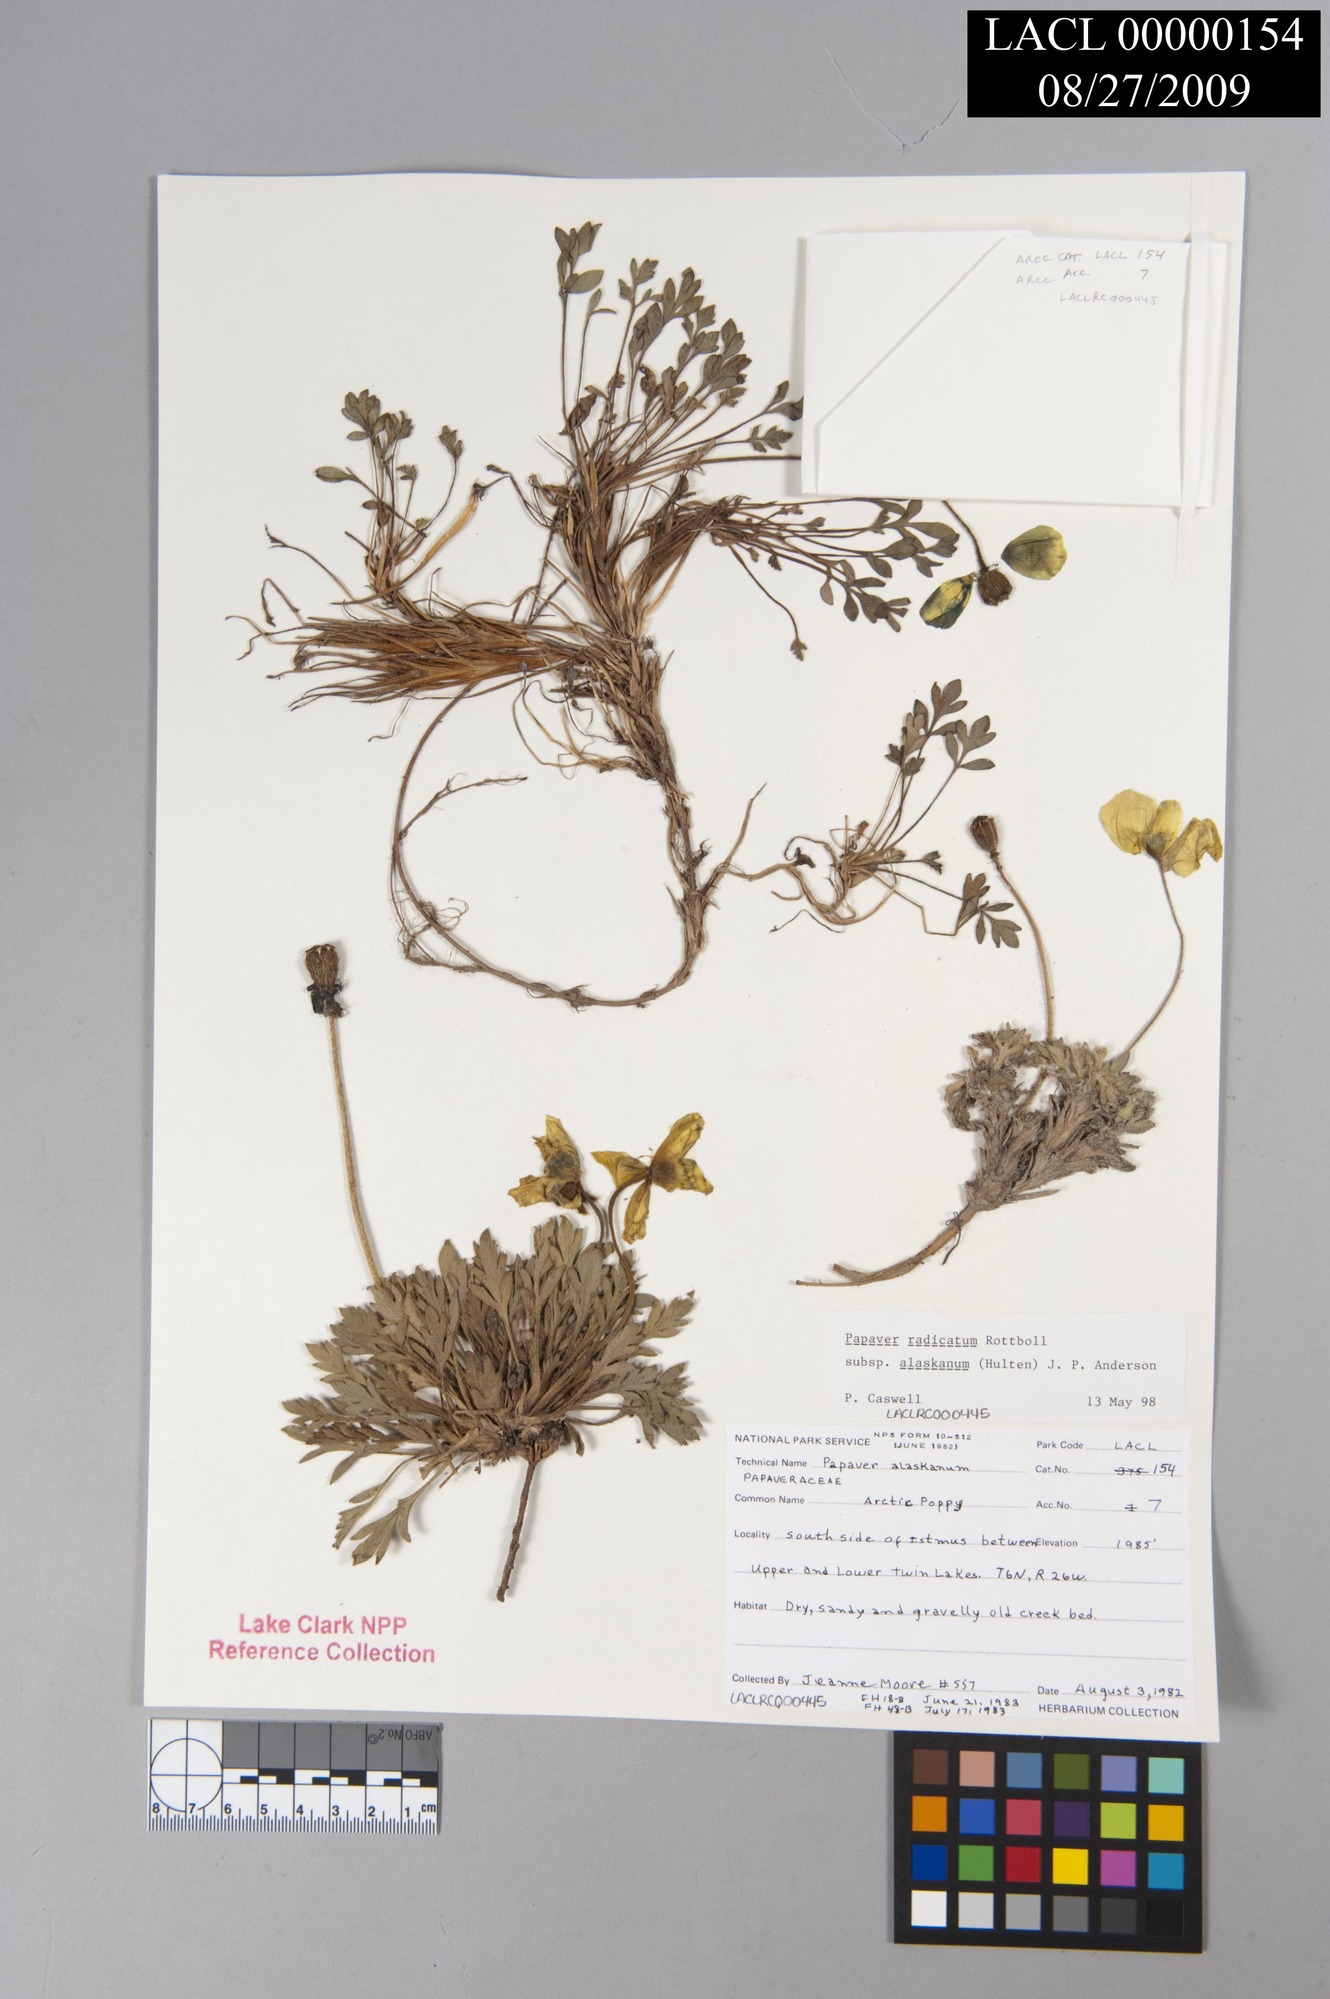 Herbarium sheet of Arctic Poppy. Three pressed plants with leaves, roots, yellow flowers and seed pods.